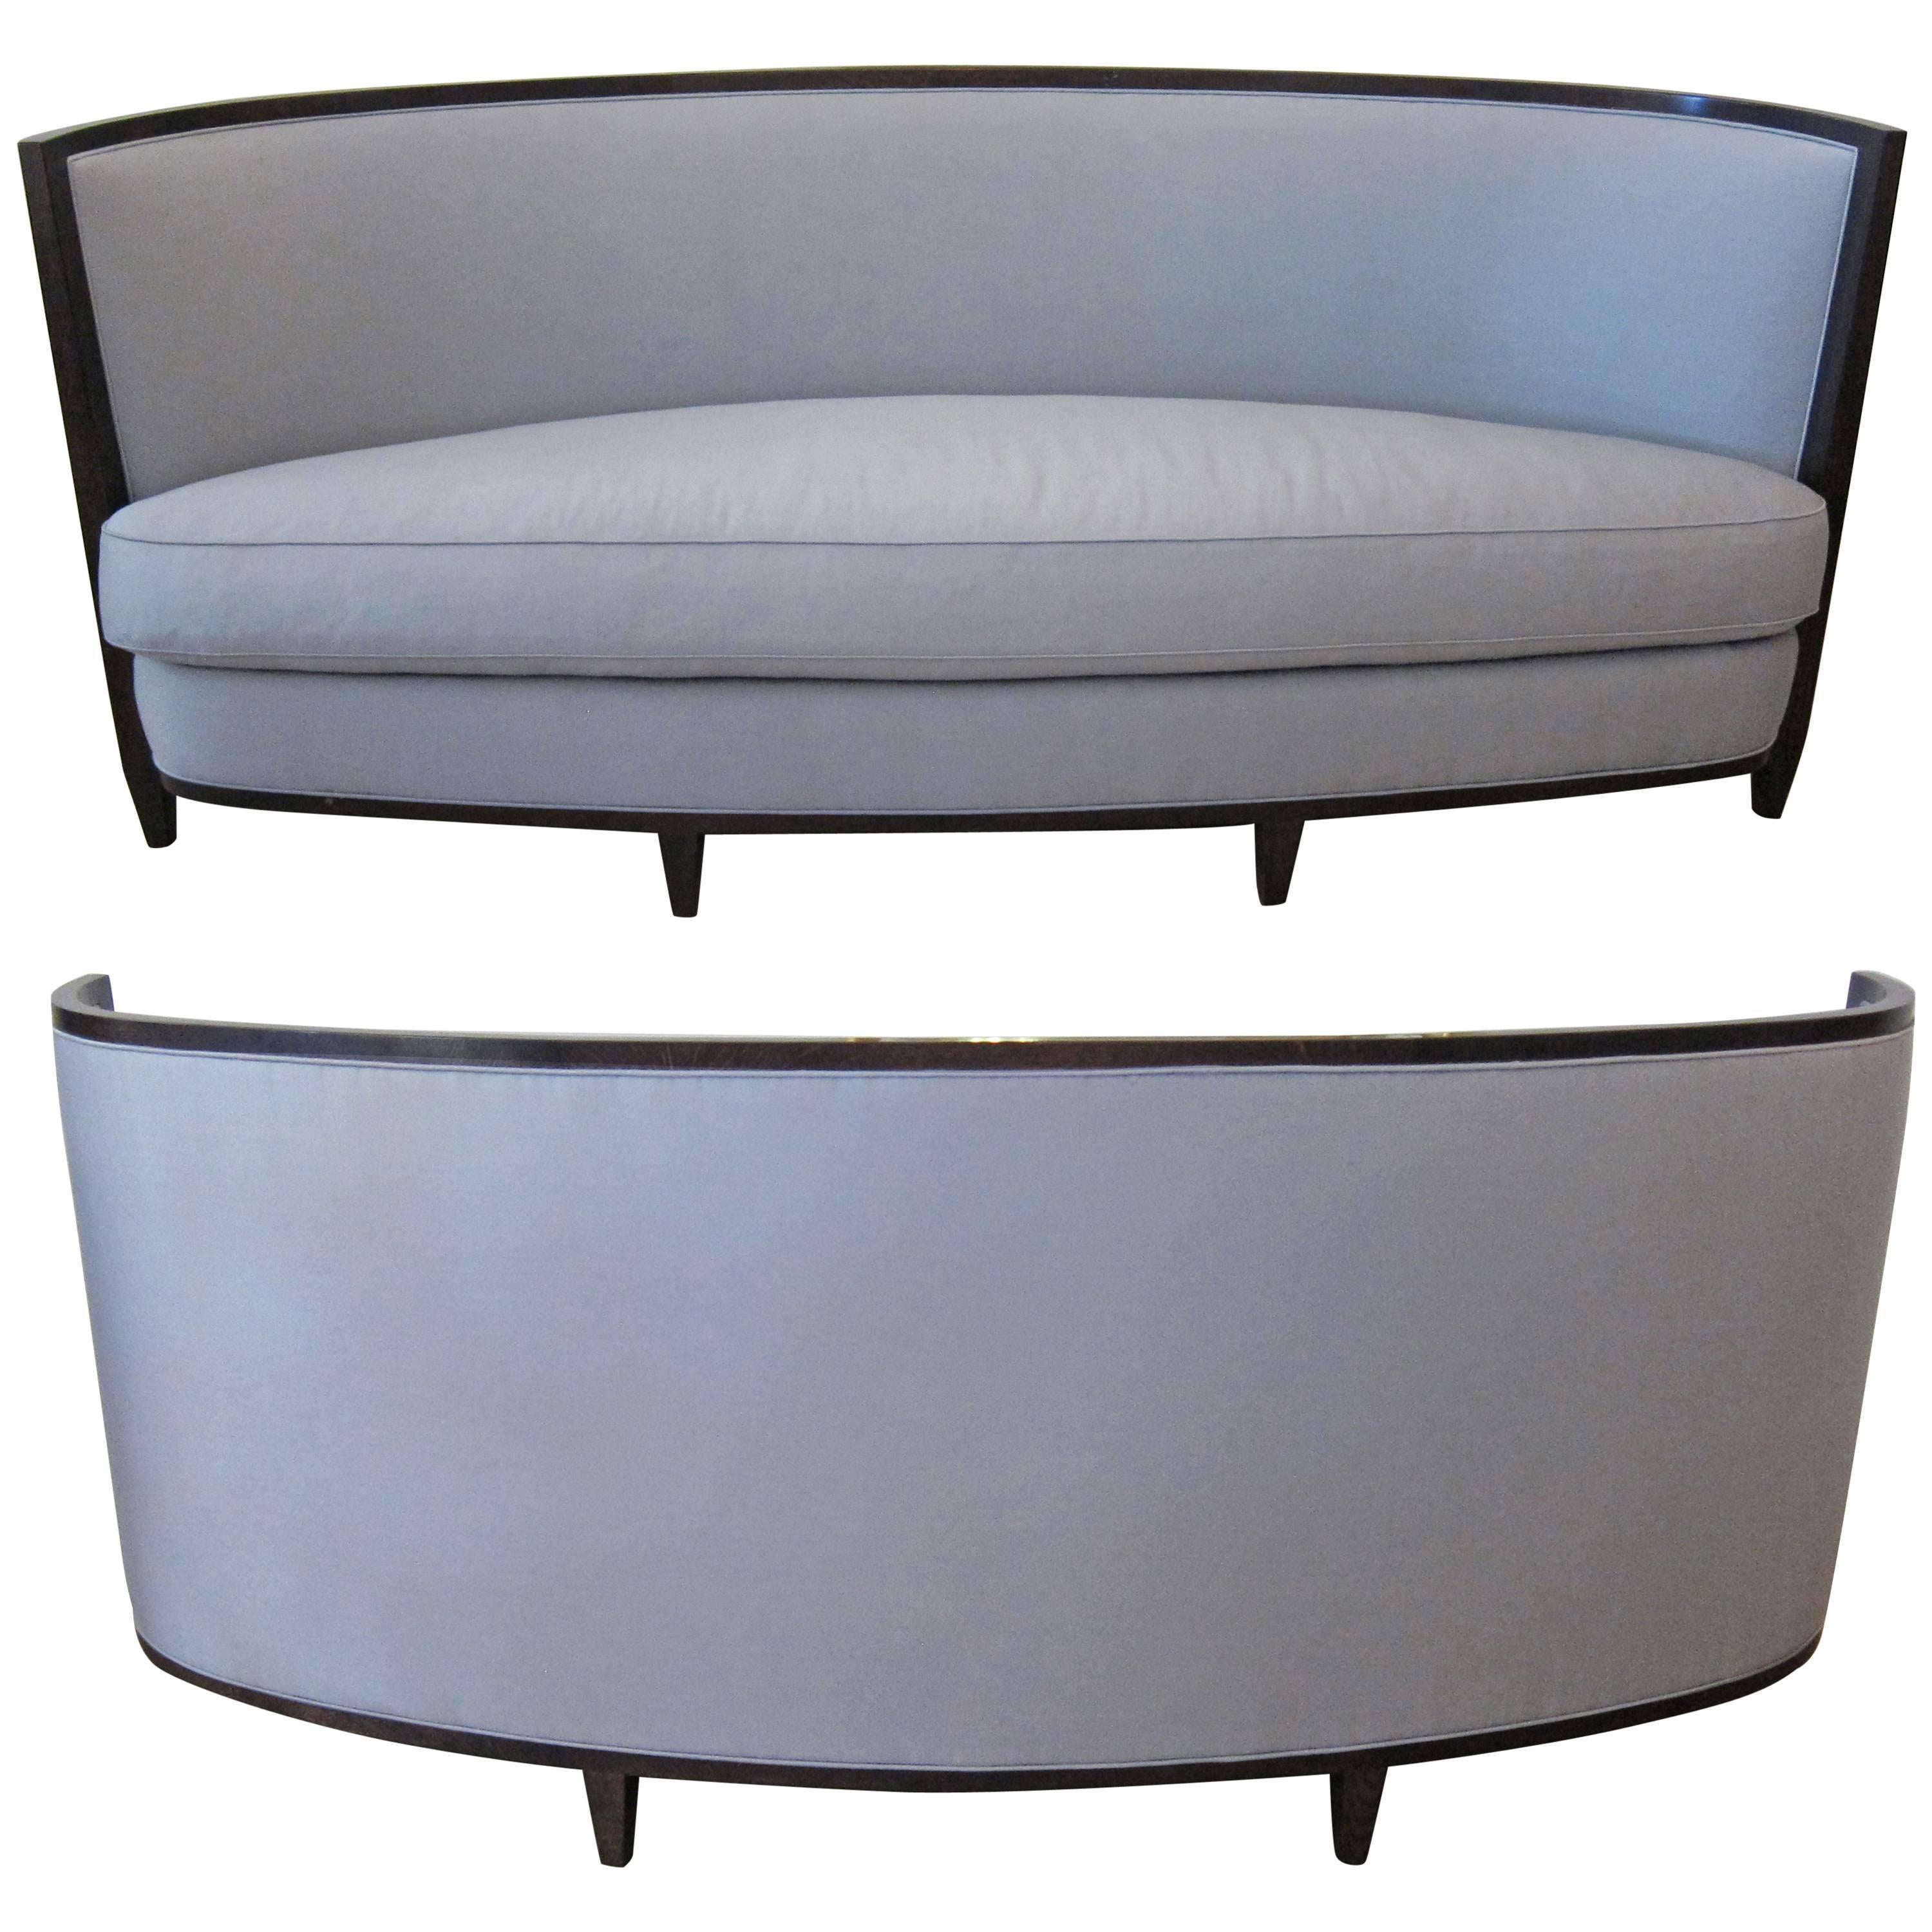 Pair of Crescent Moon Sofas by Andree Putman